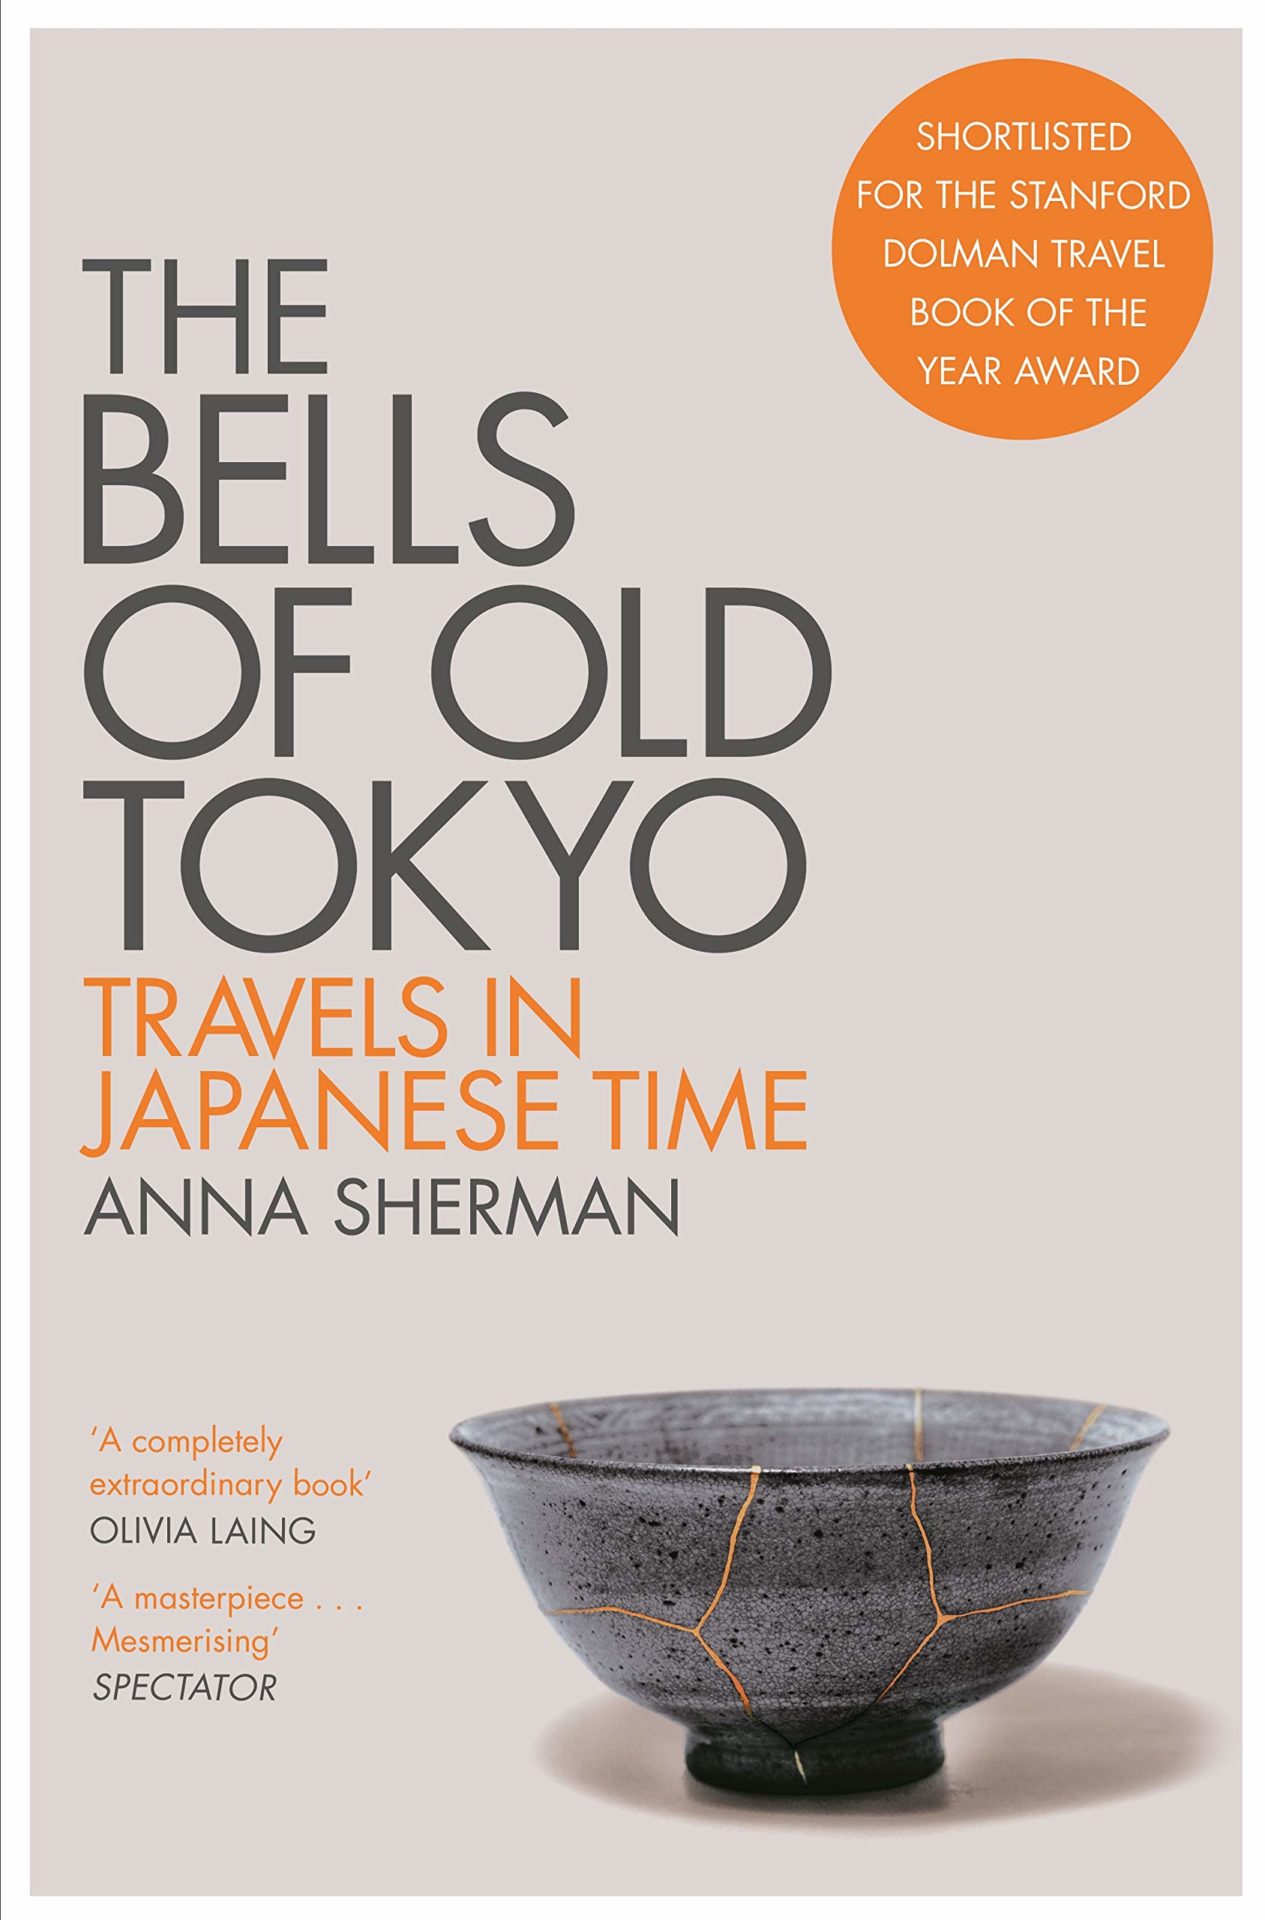 The Bells of Old Tokyo: Travels in Japanese Time by Anna Sherman